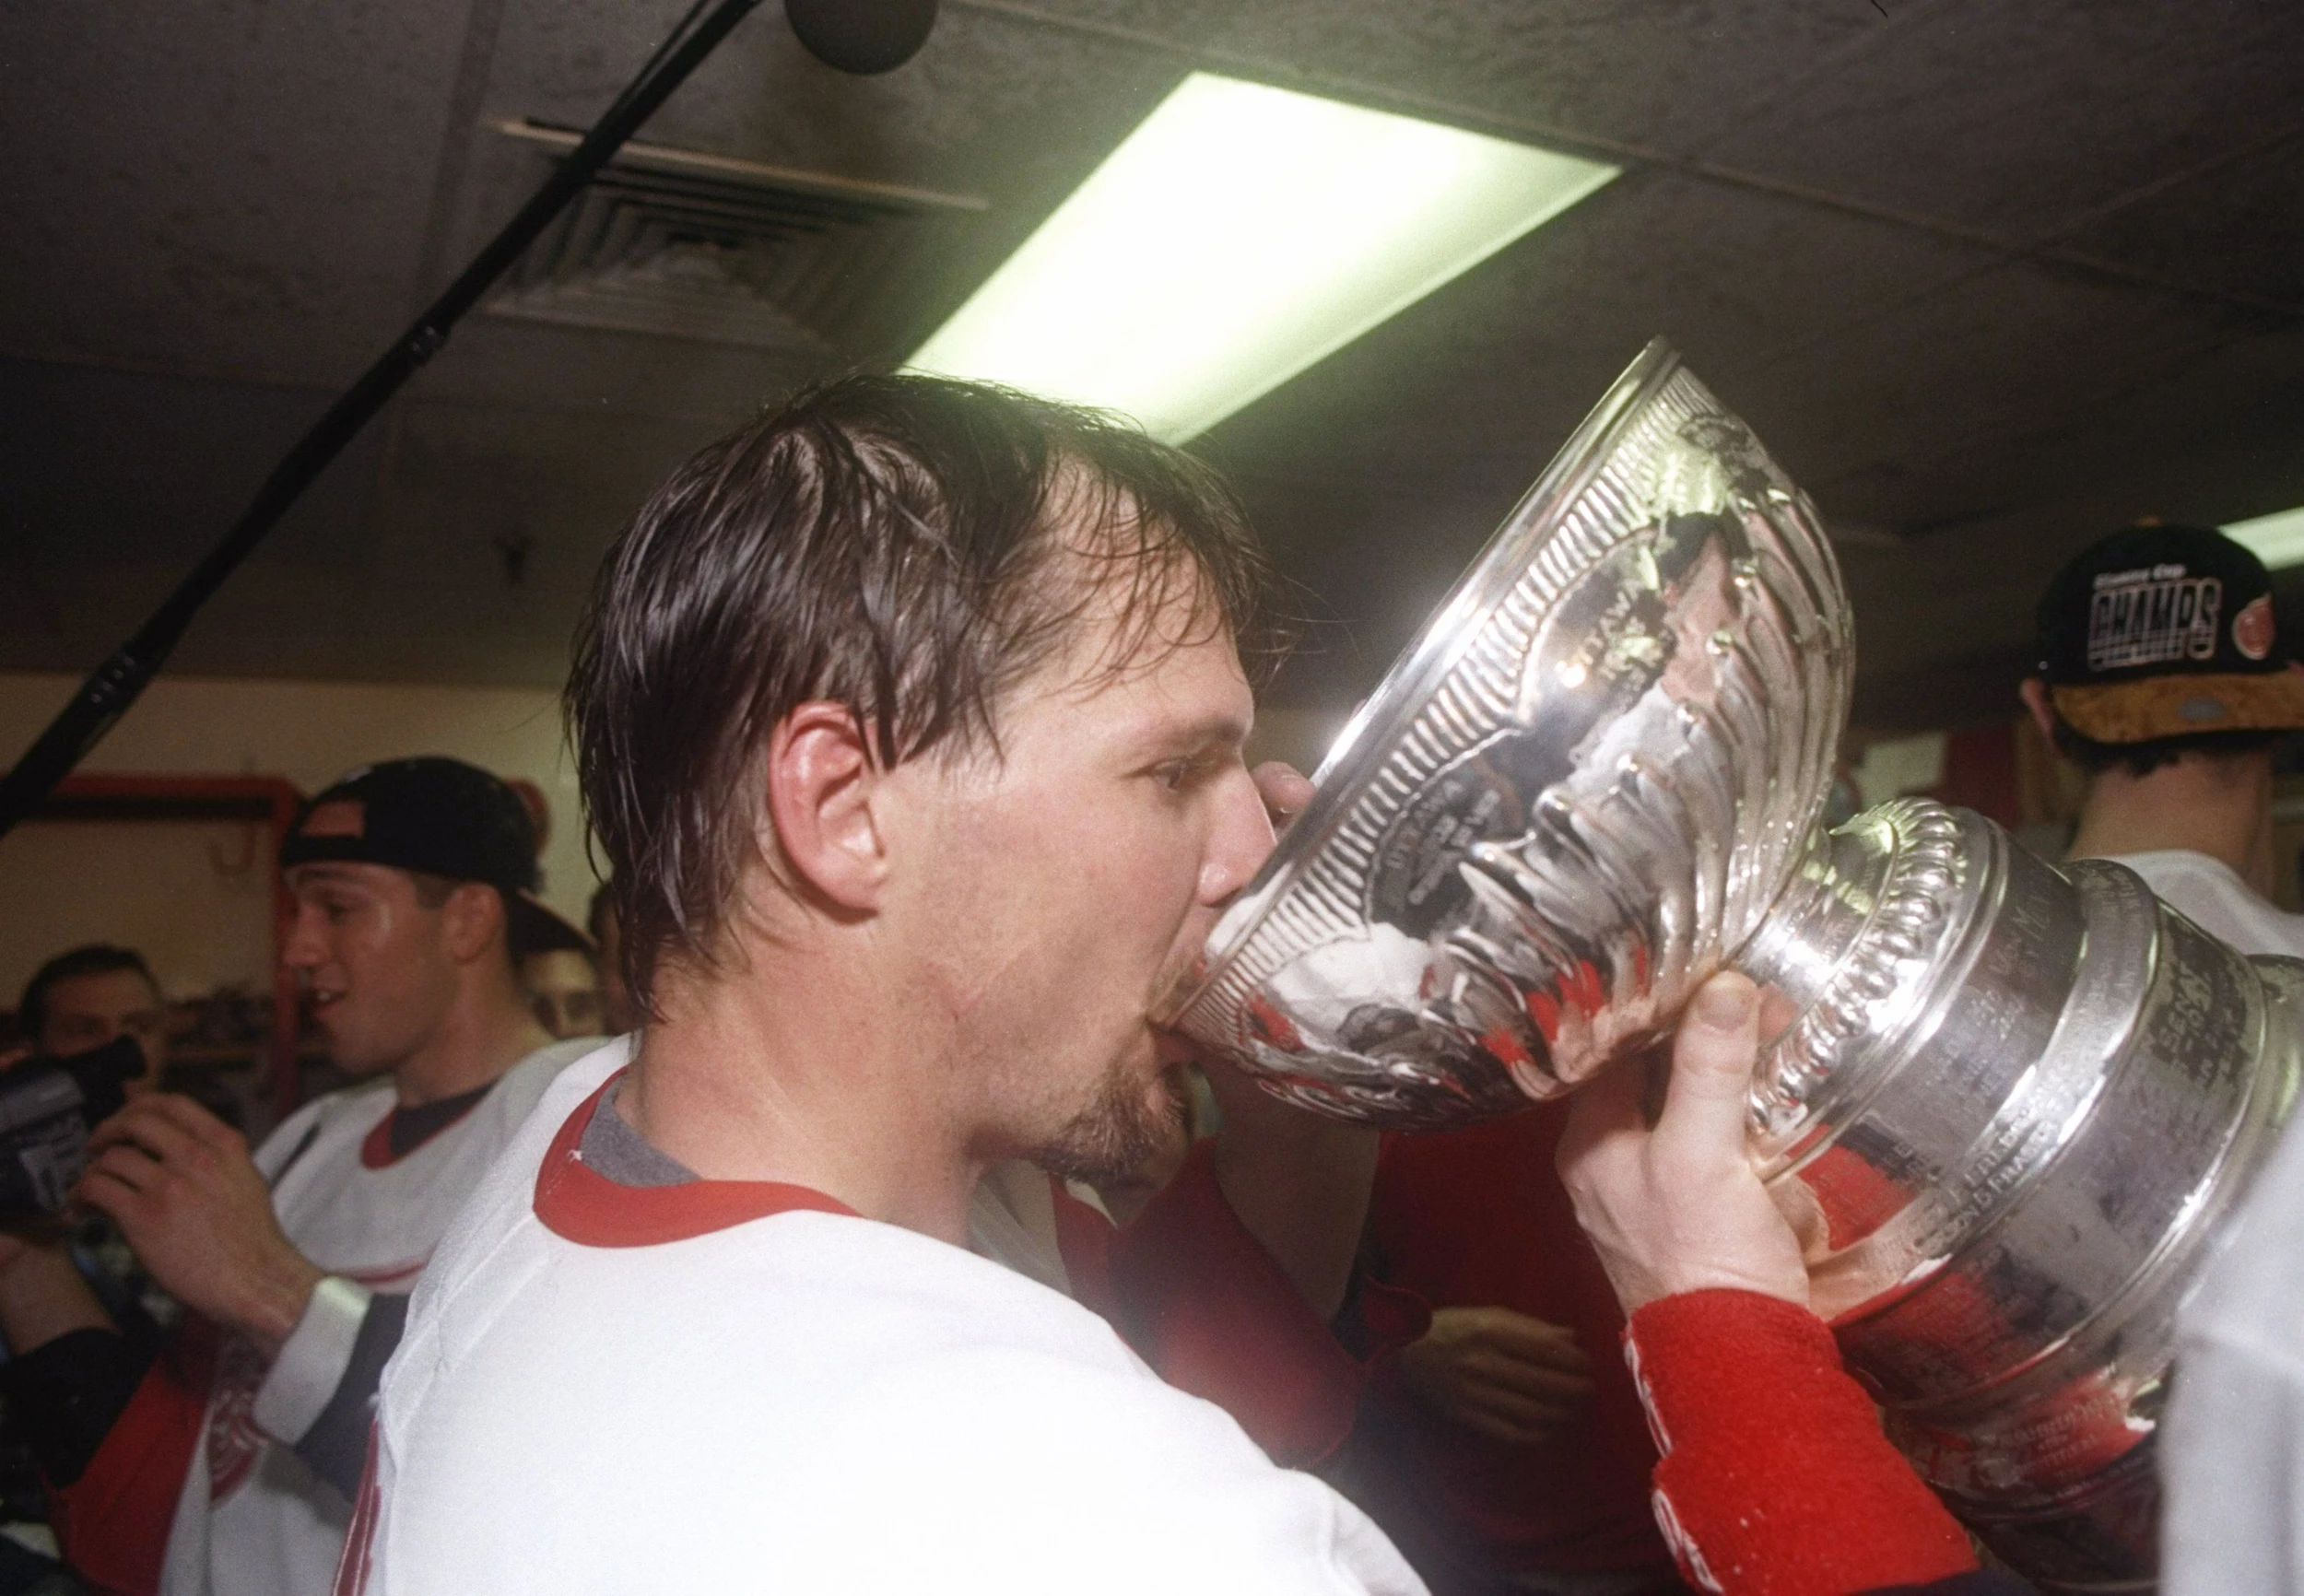 Red Wings to Honor 1997 and 1998 Stanley Cup Champions for 25th